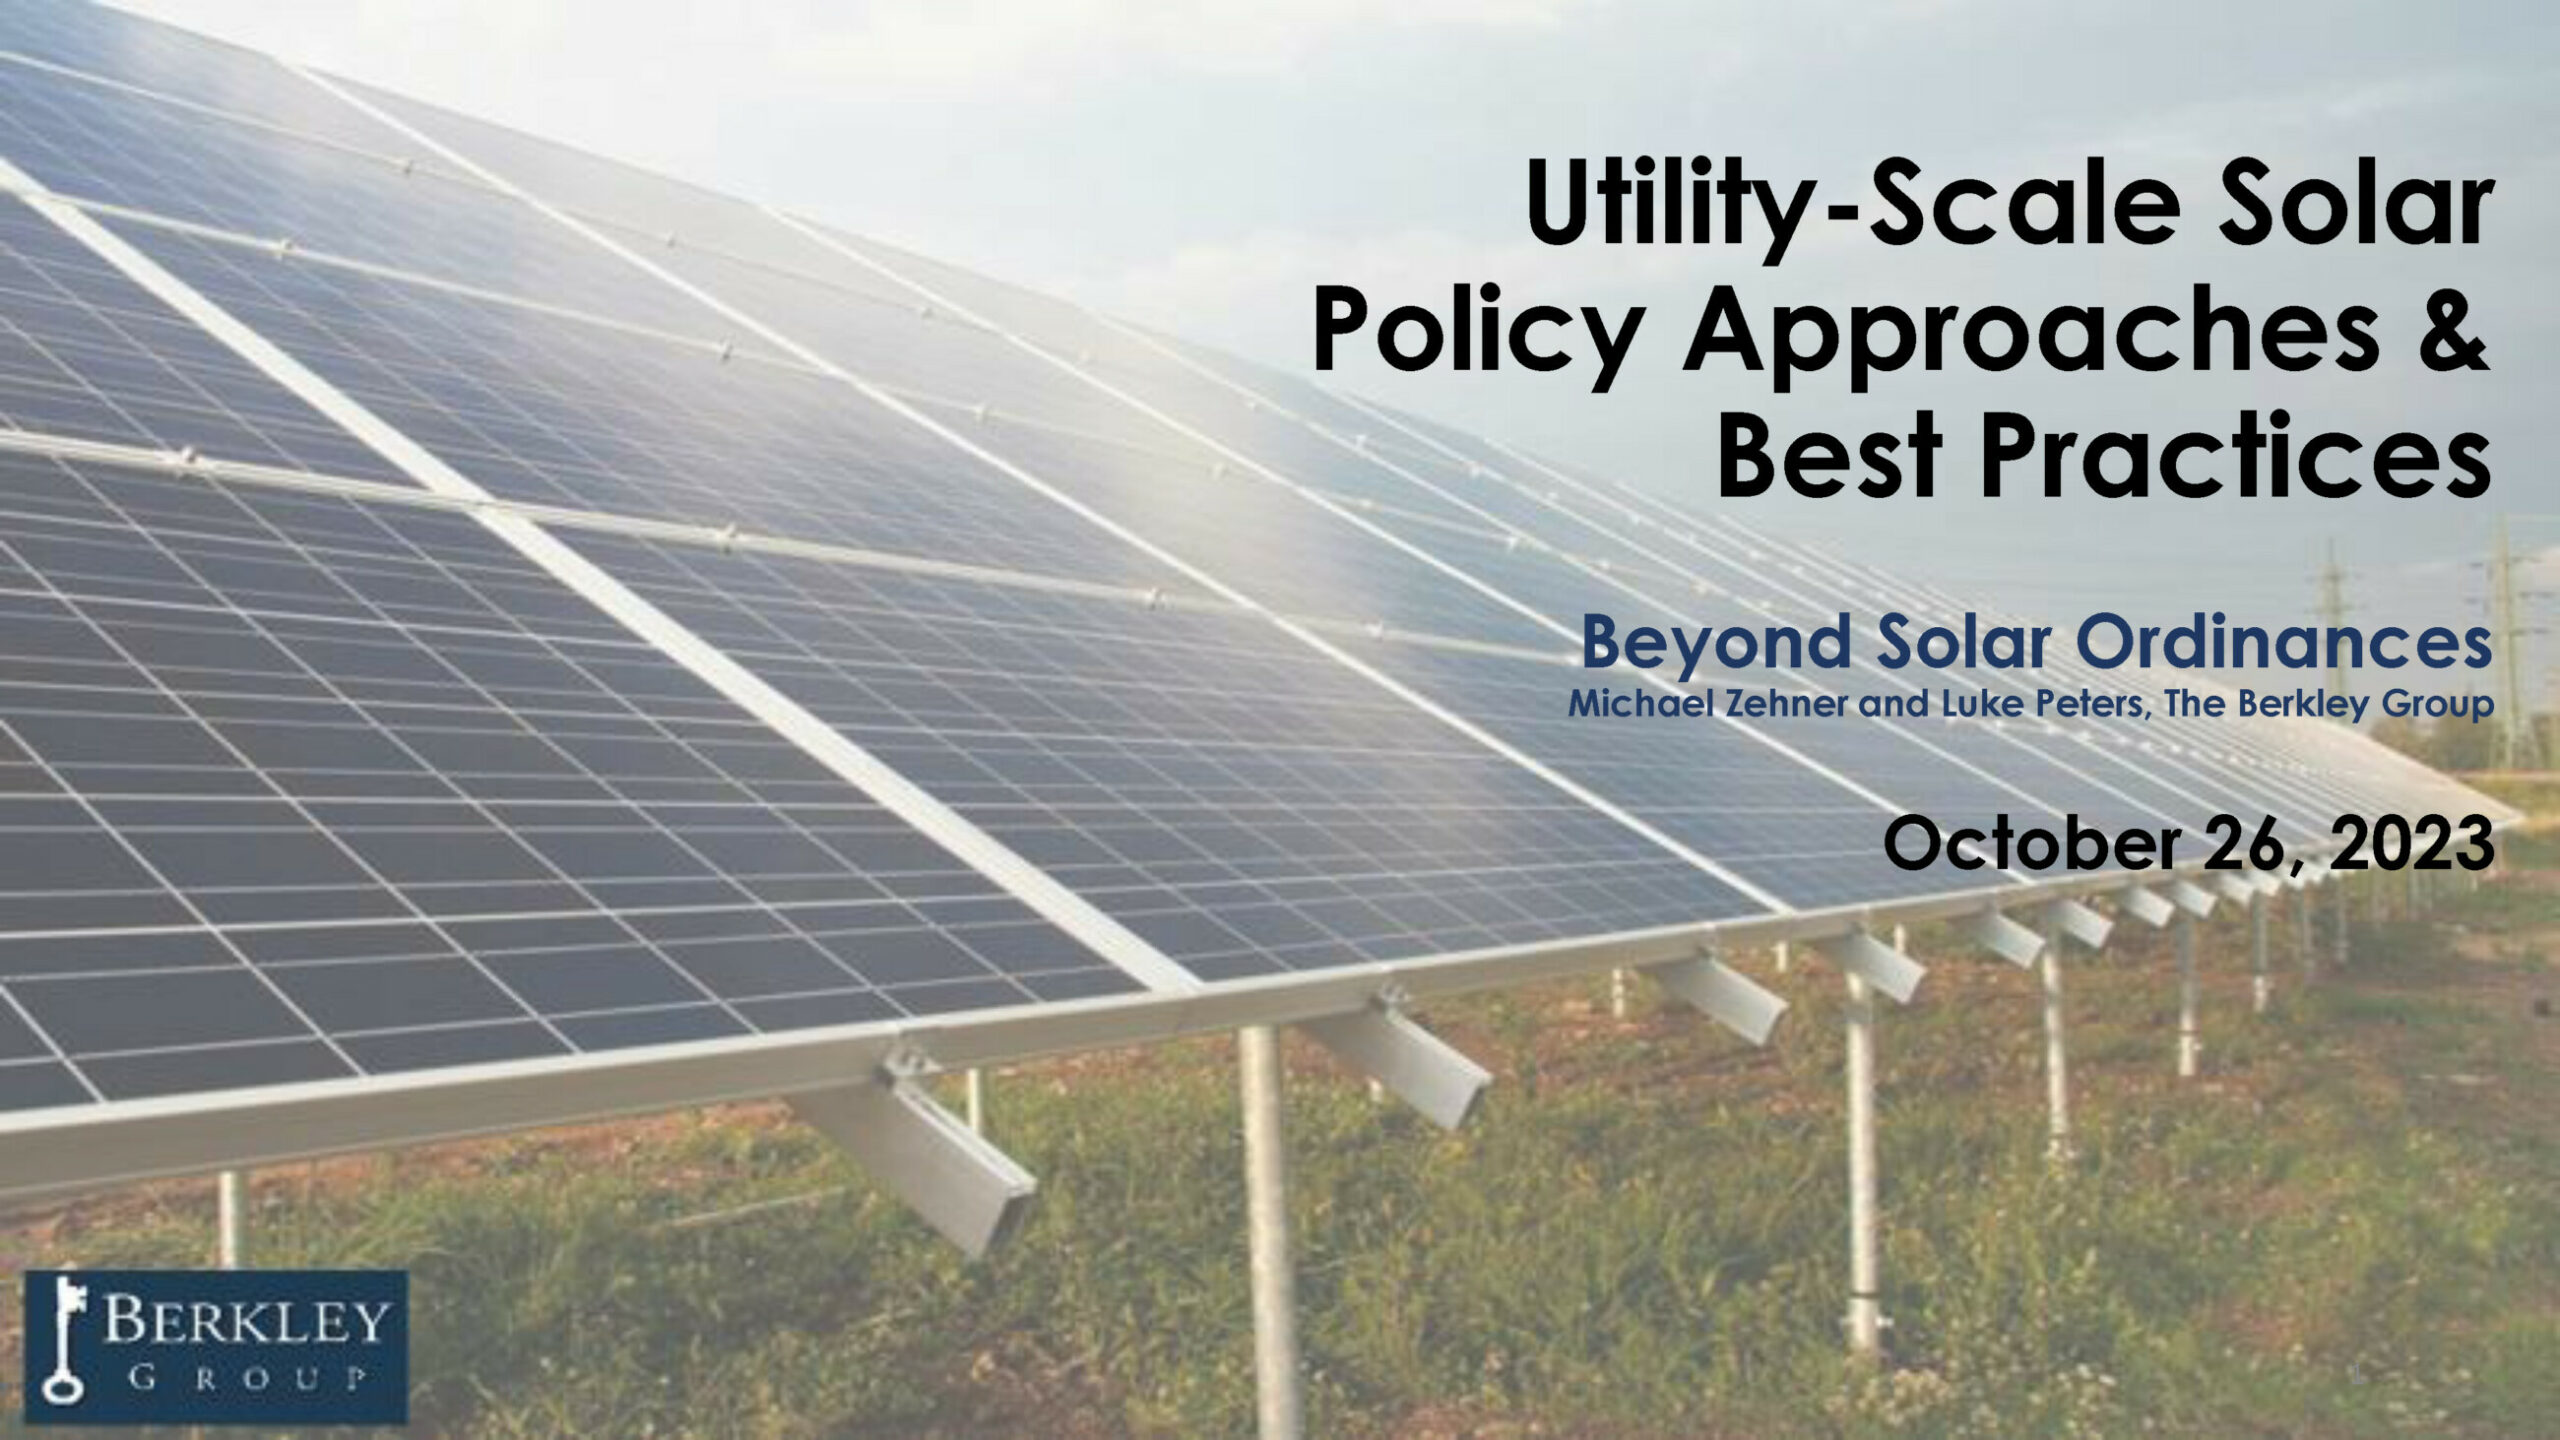 Opening presentation slide with solar panels in a field overlayed with presentation title Utility-Scale Solar Policy Approaches & Best Practices and Berkley Group logo.